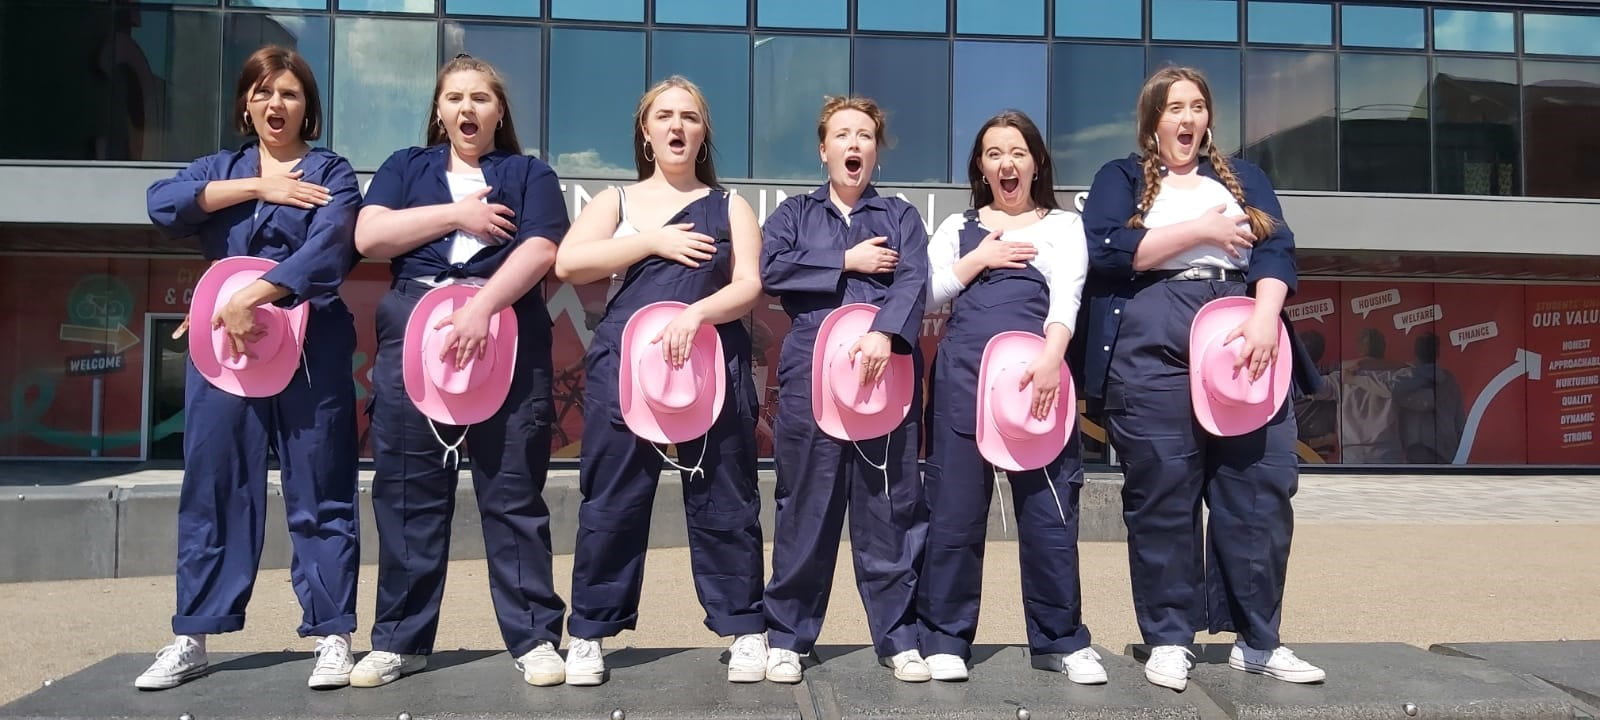 Image contains six women holding pink cowboy hats over their crotch. All dressed in men's workwear.